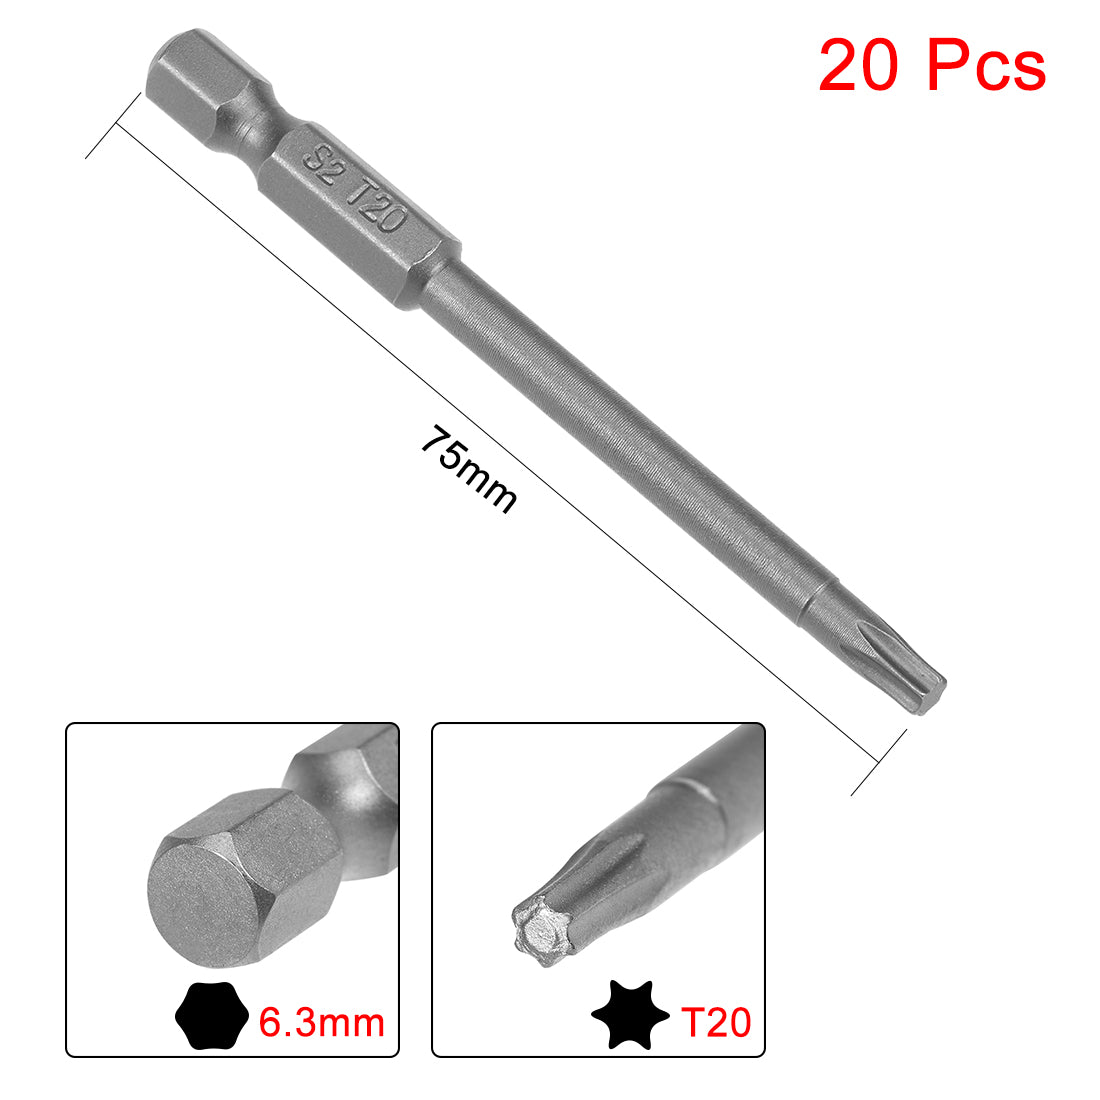 Uxcell Uxcell 20pcs 75mm Long 1/4" Hex Shank T10 Magnetic Torx Head Screwdriver Bits S2 High Alloy Steel